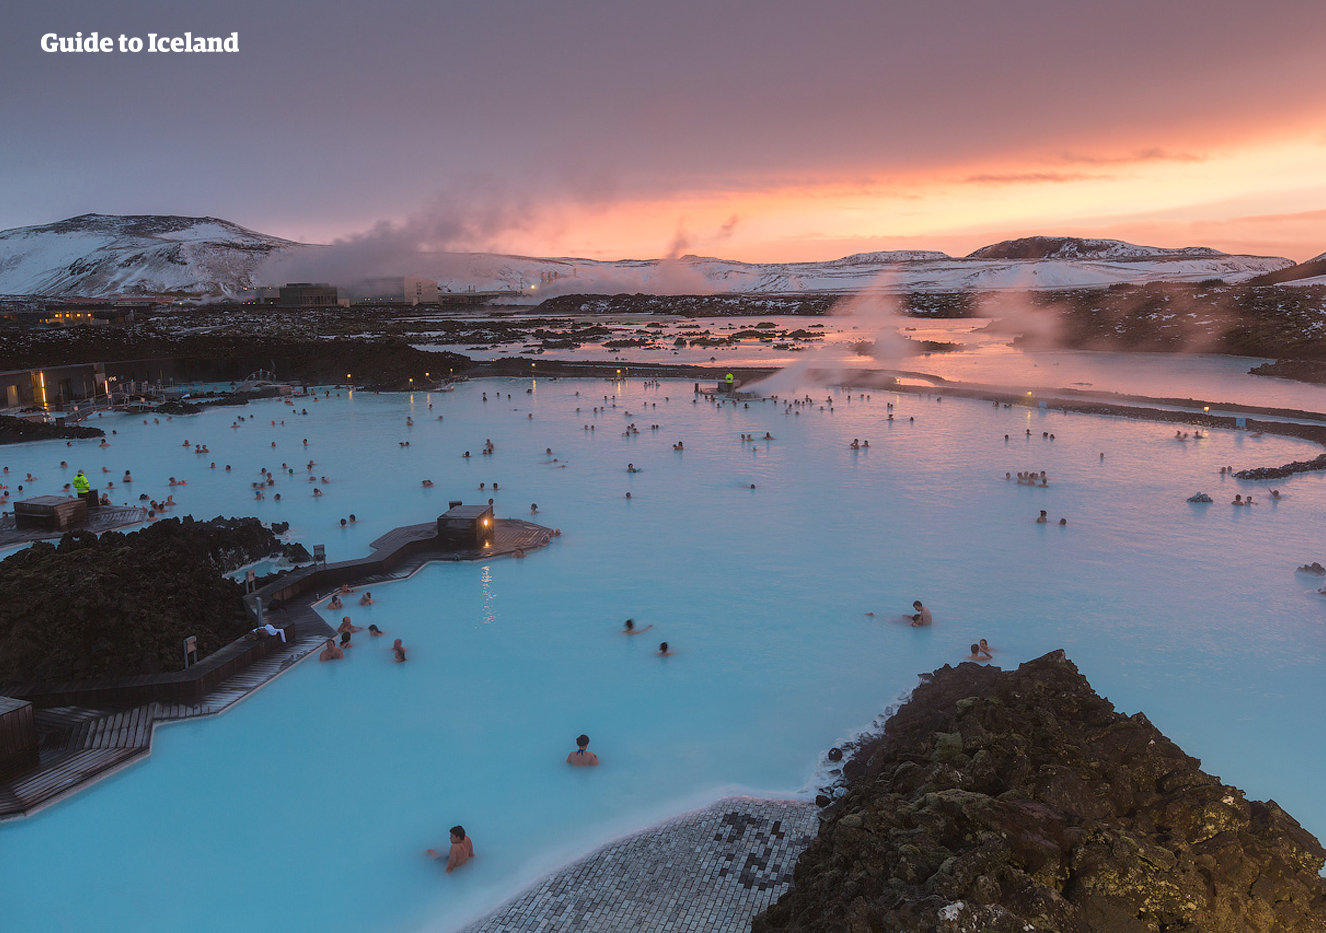 Blue Lagoon Iceland: Tips for Visiting the Geothermal Spa - wide 8